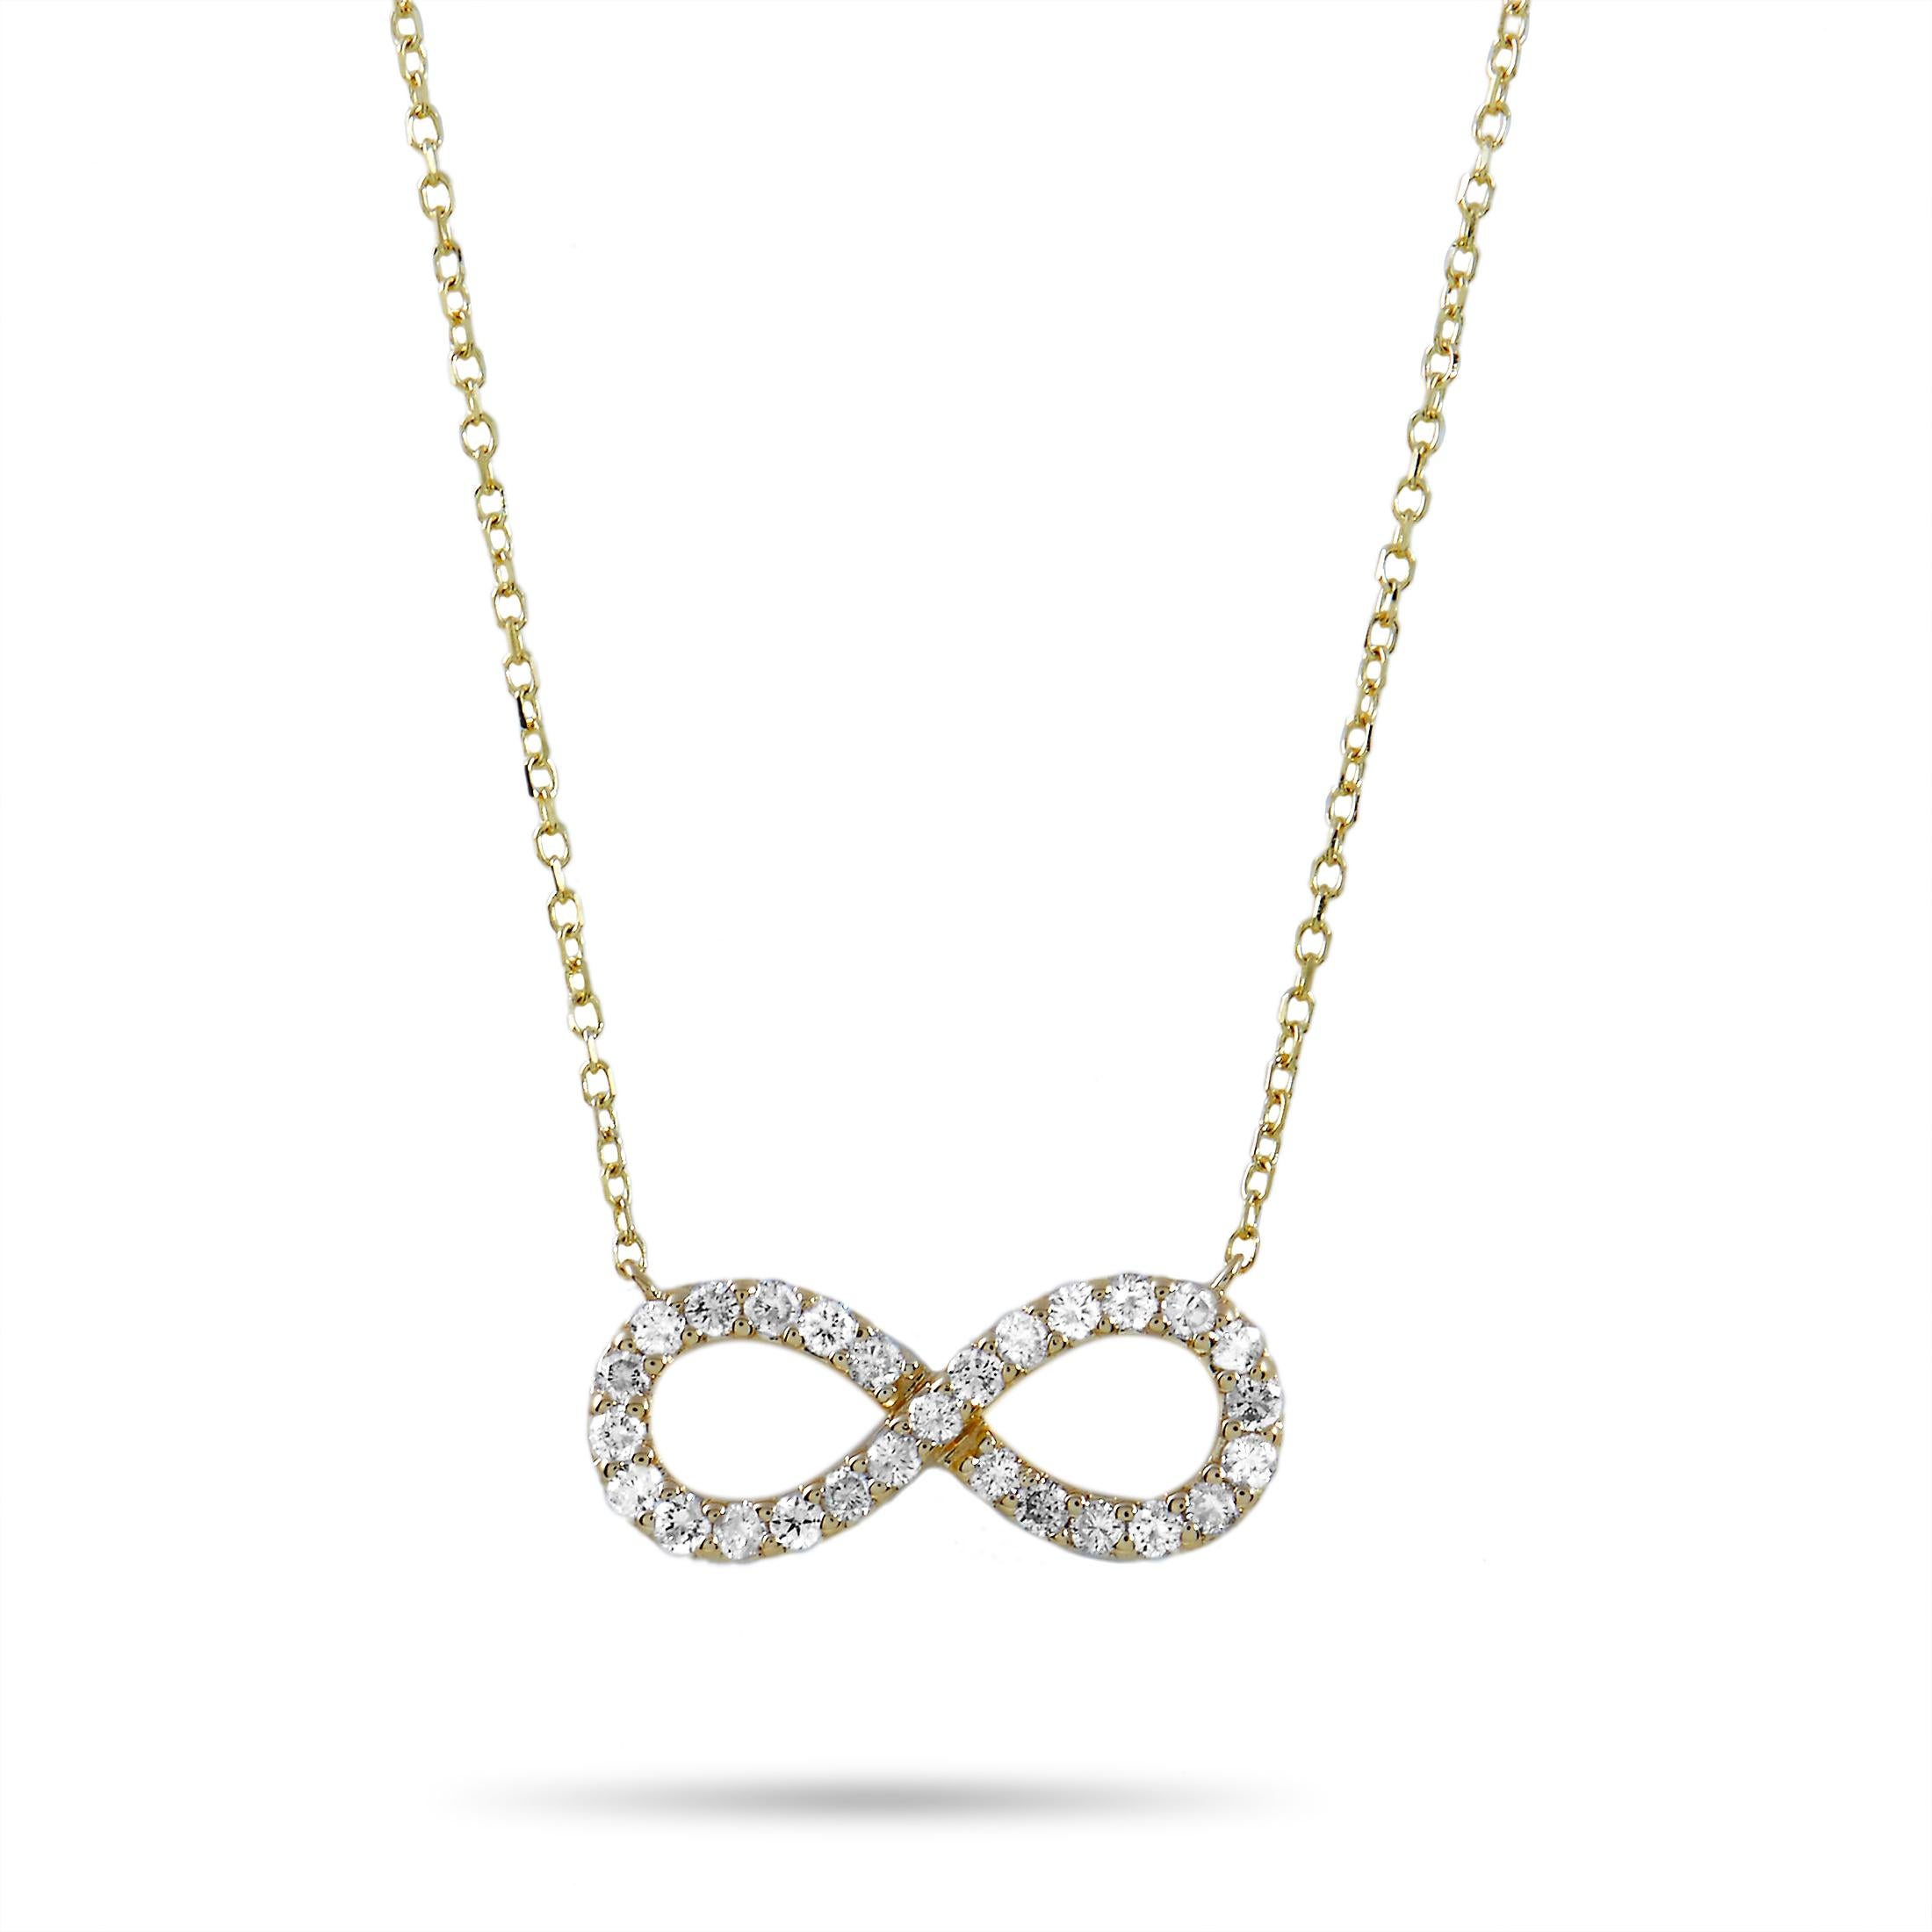 This LB Exclusive necklace is made of 14K yellow gold and embellished with diamonds that amount to 0.30 carats. The necklace weighs 2 grams and boasts a 16” chain and an infinity symbol pendant that measures 0.60” in width.
 
 Offered in brand new